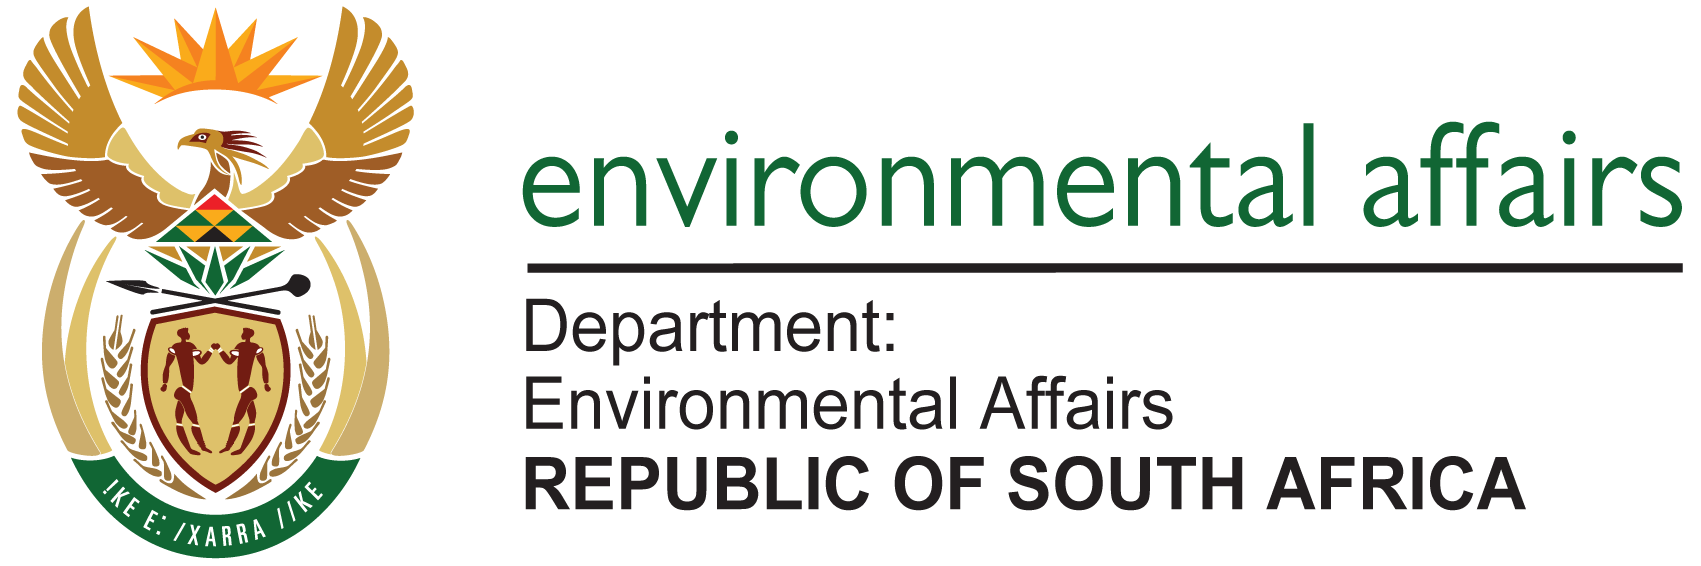 Department of Environmental Affairs, South Africa